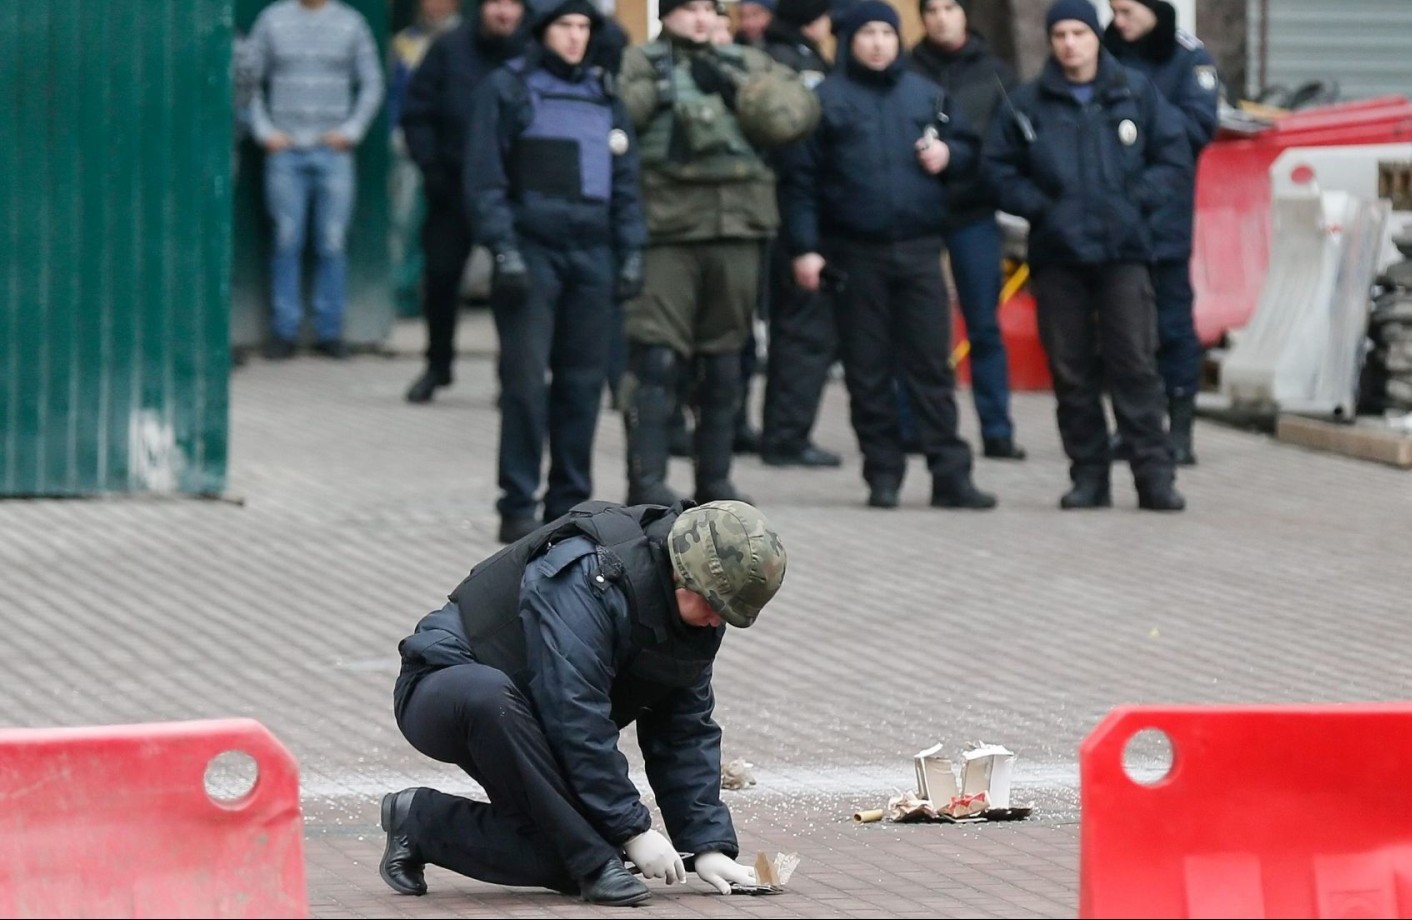 epa05641004 Ukrainian policeman investigates the suspected explosive object near of Kiev’s City hall in Kiev, Ukraine, 21 November 2016. A man, who left probable dangerous objects, was arrested by police. Ukrainians mark the third anniversary of the Euromaidan Revolution in Ukraine. On 21 November 2013 activists started an anti-government picket after then-Prime Minister Mykola Azarov announced the suspension of a landmark treaty with the European Union. The protests eventually led to the ouster of President Viktor Yanukovych, creating political rifts through the country that erupted into violent conflict between seperatists and government forces in the eastern part of the country in the spring.  EPA/SERGEY DOLZHENKO